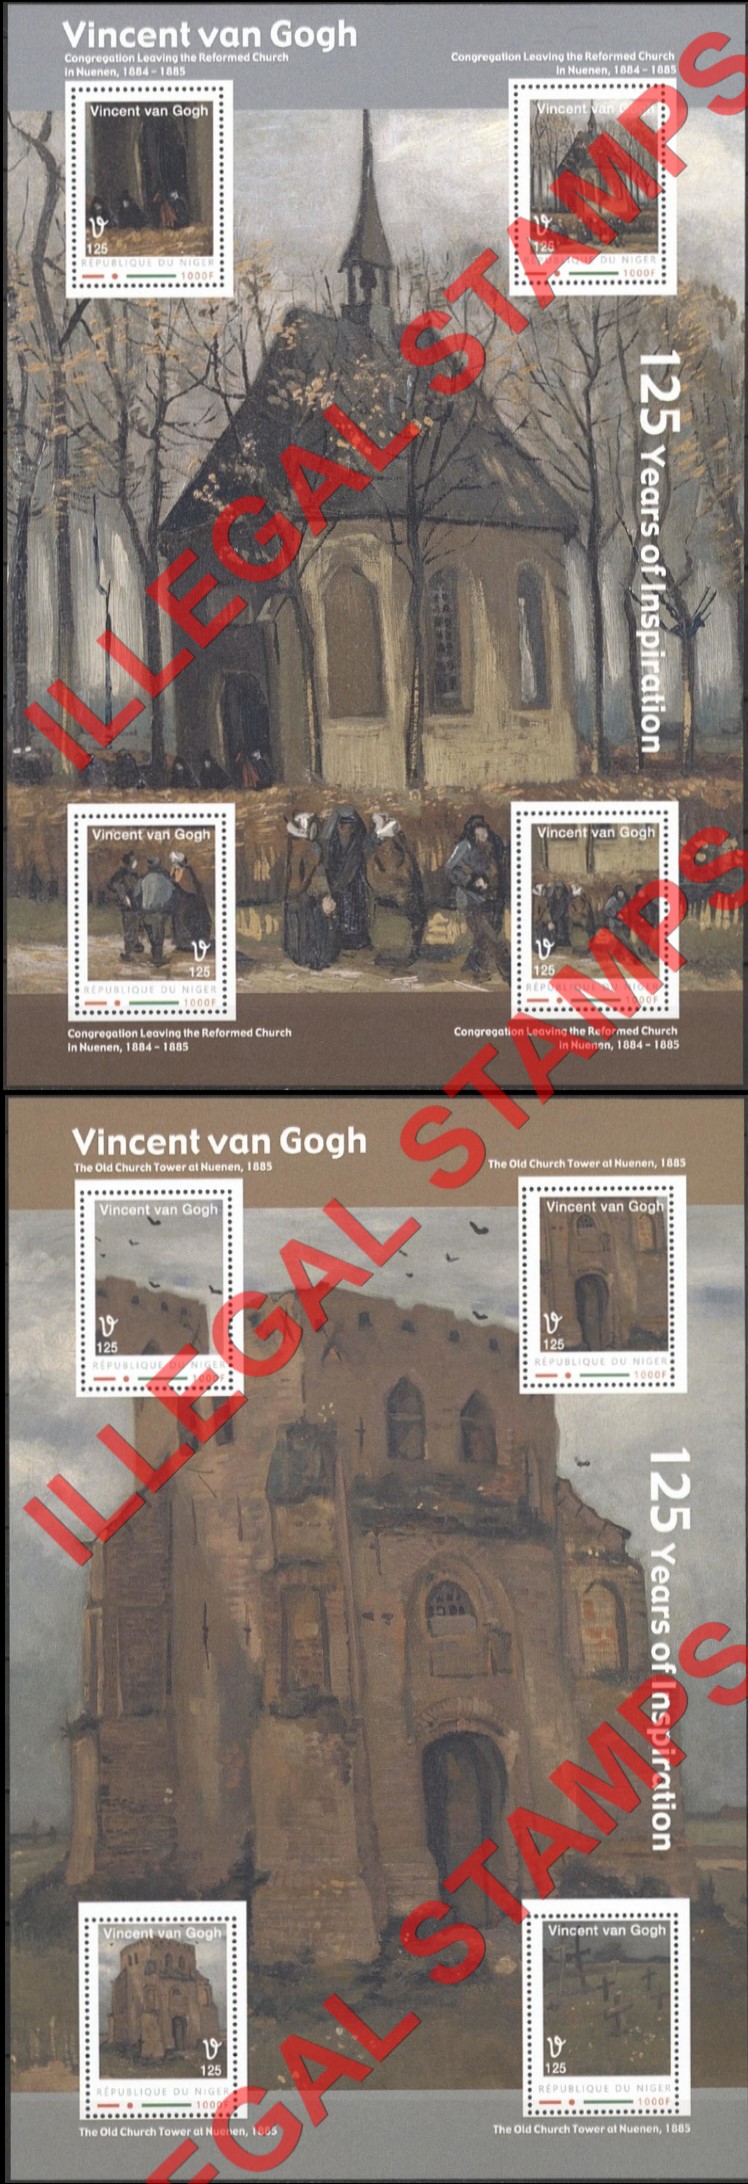 Niger 2012 Paintings by Vincent Van Gogh Illegal Stamp Souvenir Sheets of 4 (Part 1)